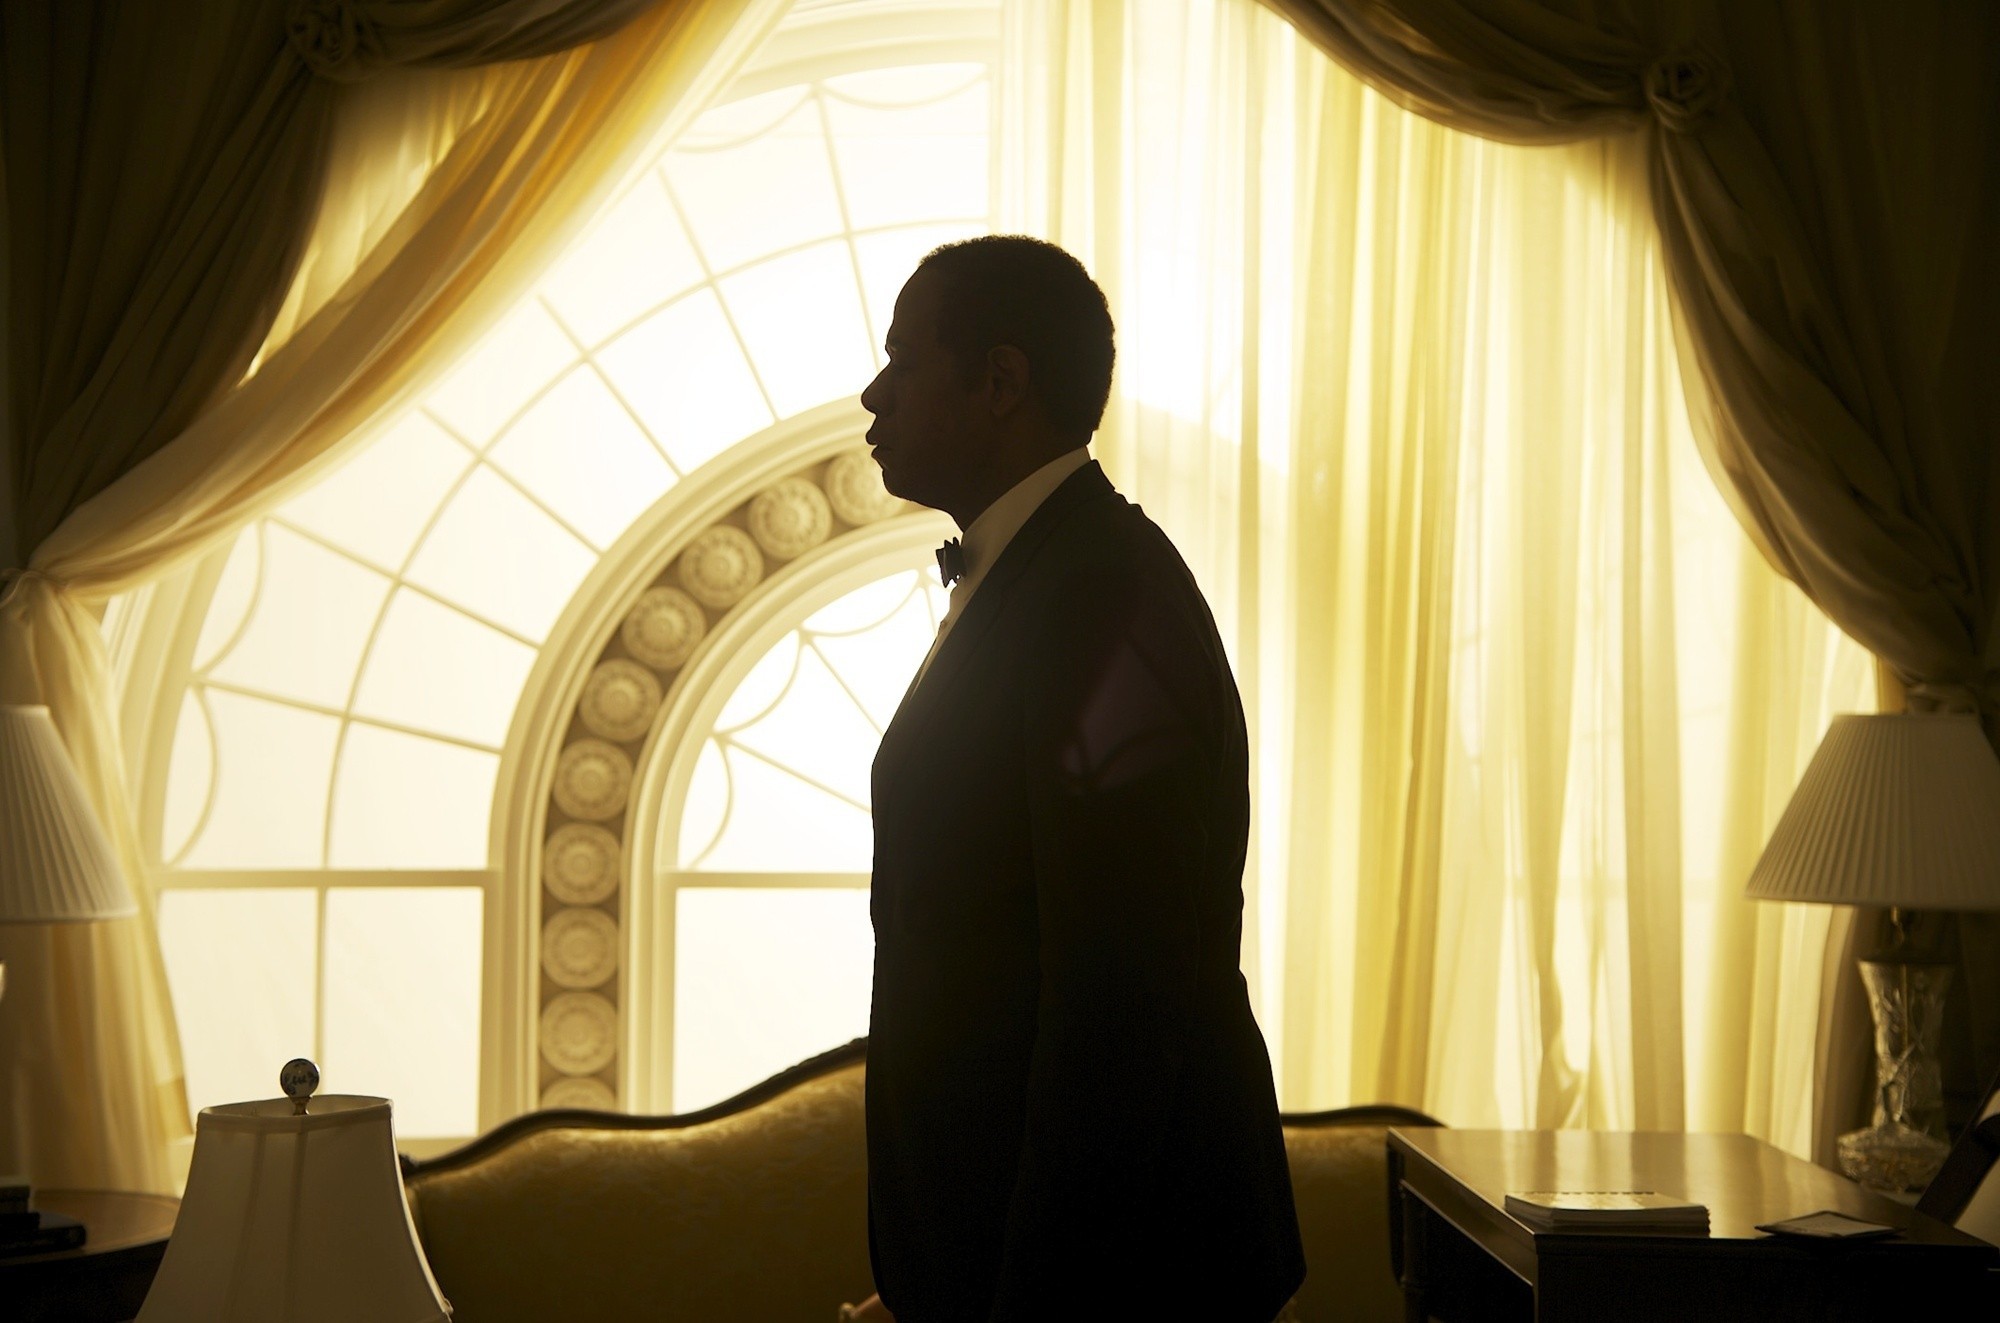 Movie Review: Lee Daniels’ The Butler misses the mark